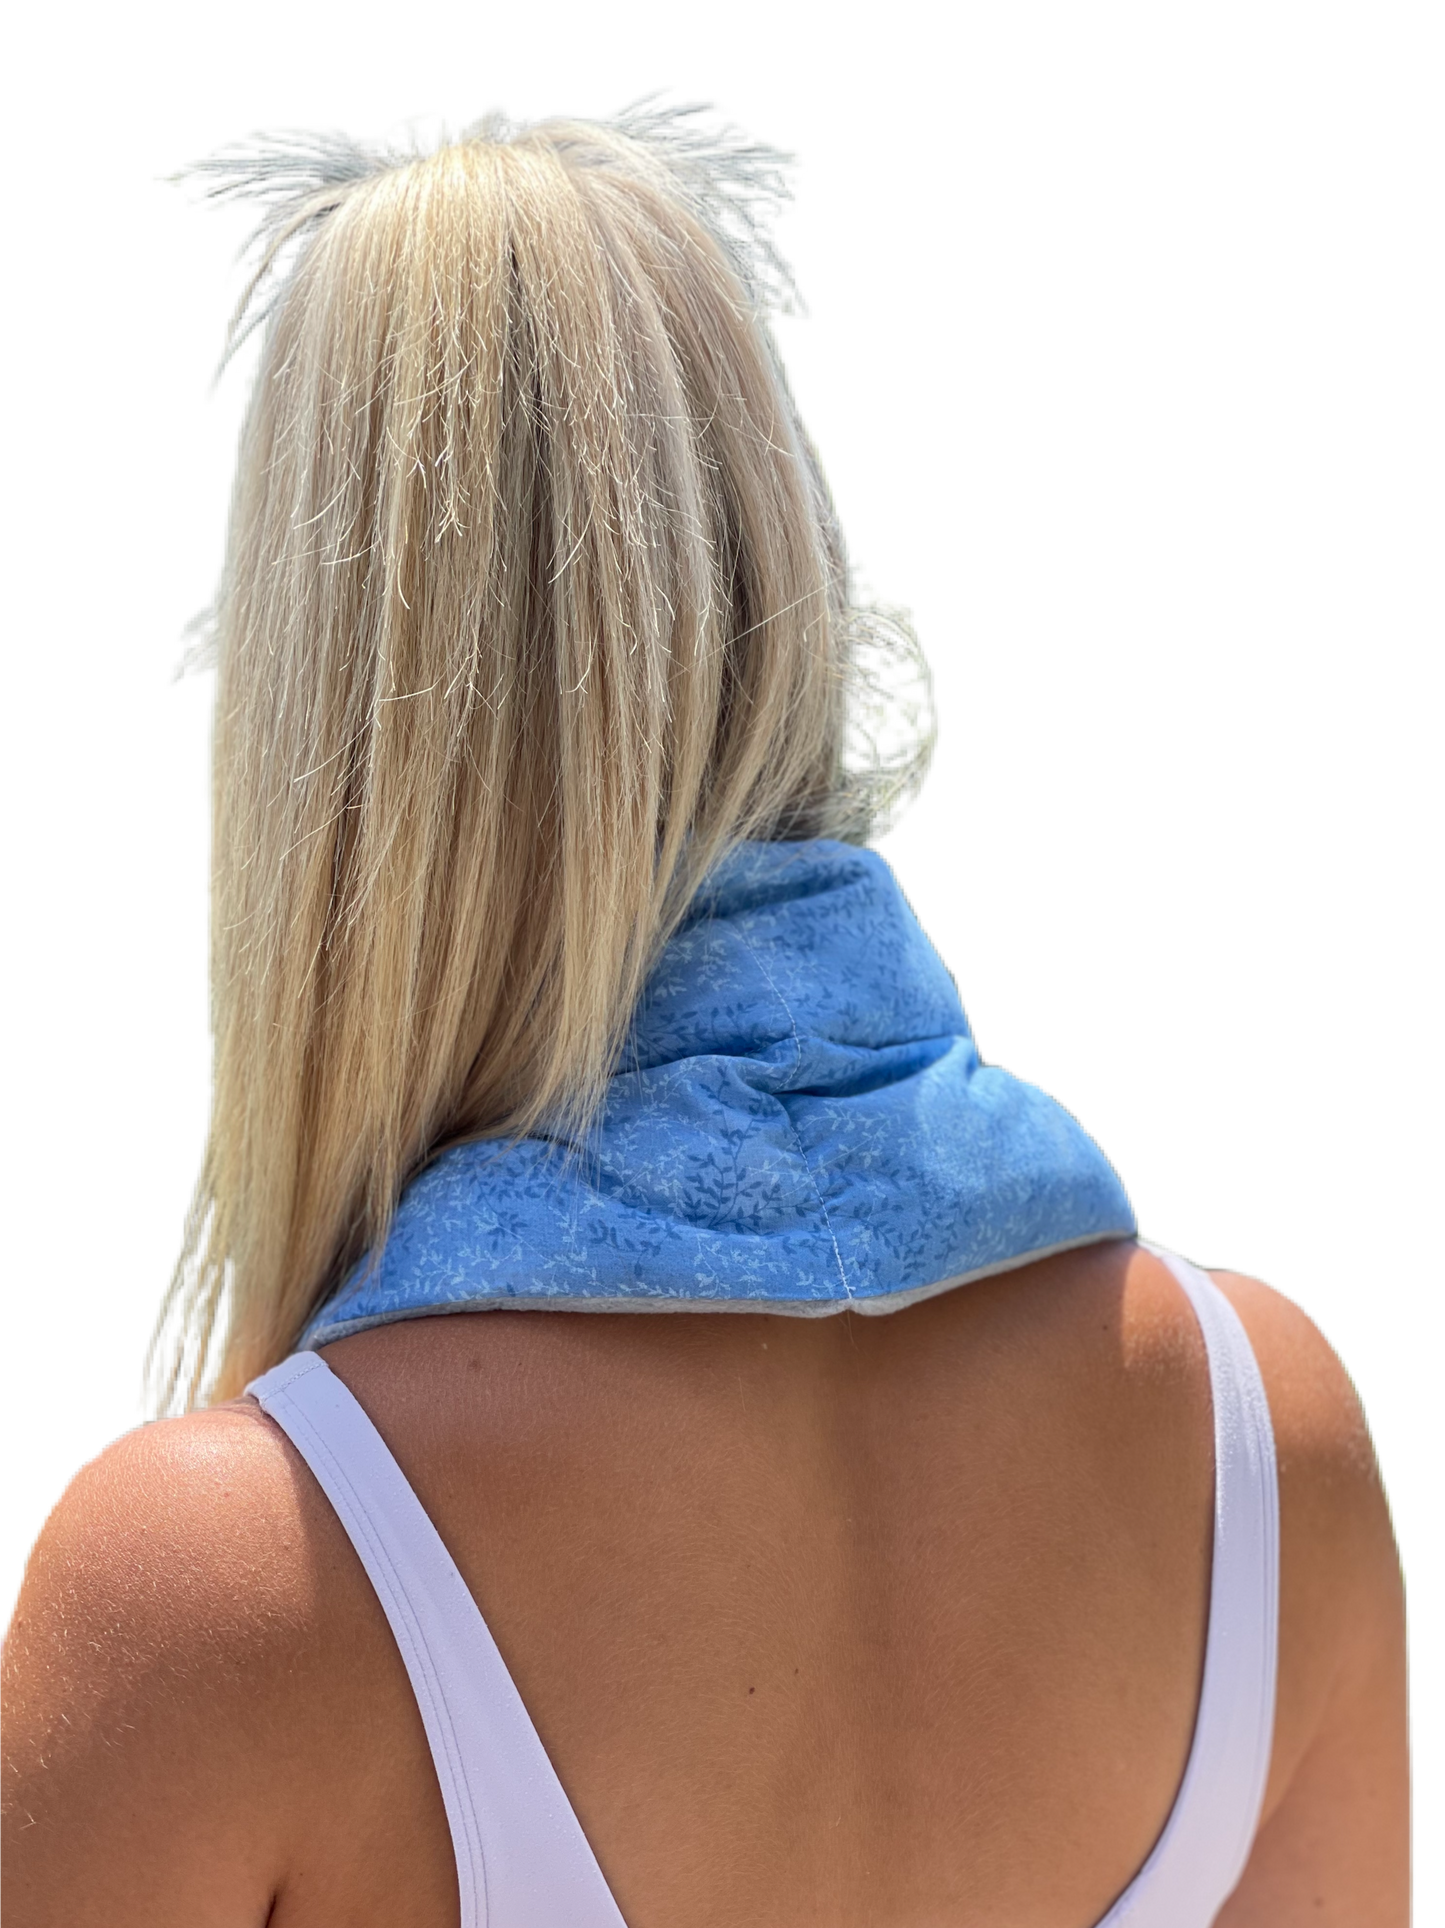 microwave heating pads microwavable heat pack therapy microondas microwaveable neck shoulders back cramps hot compress heated cold warm warmer reusable flax seed compresas calientes massage flaxseed gifts women portable compression care unscented